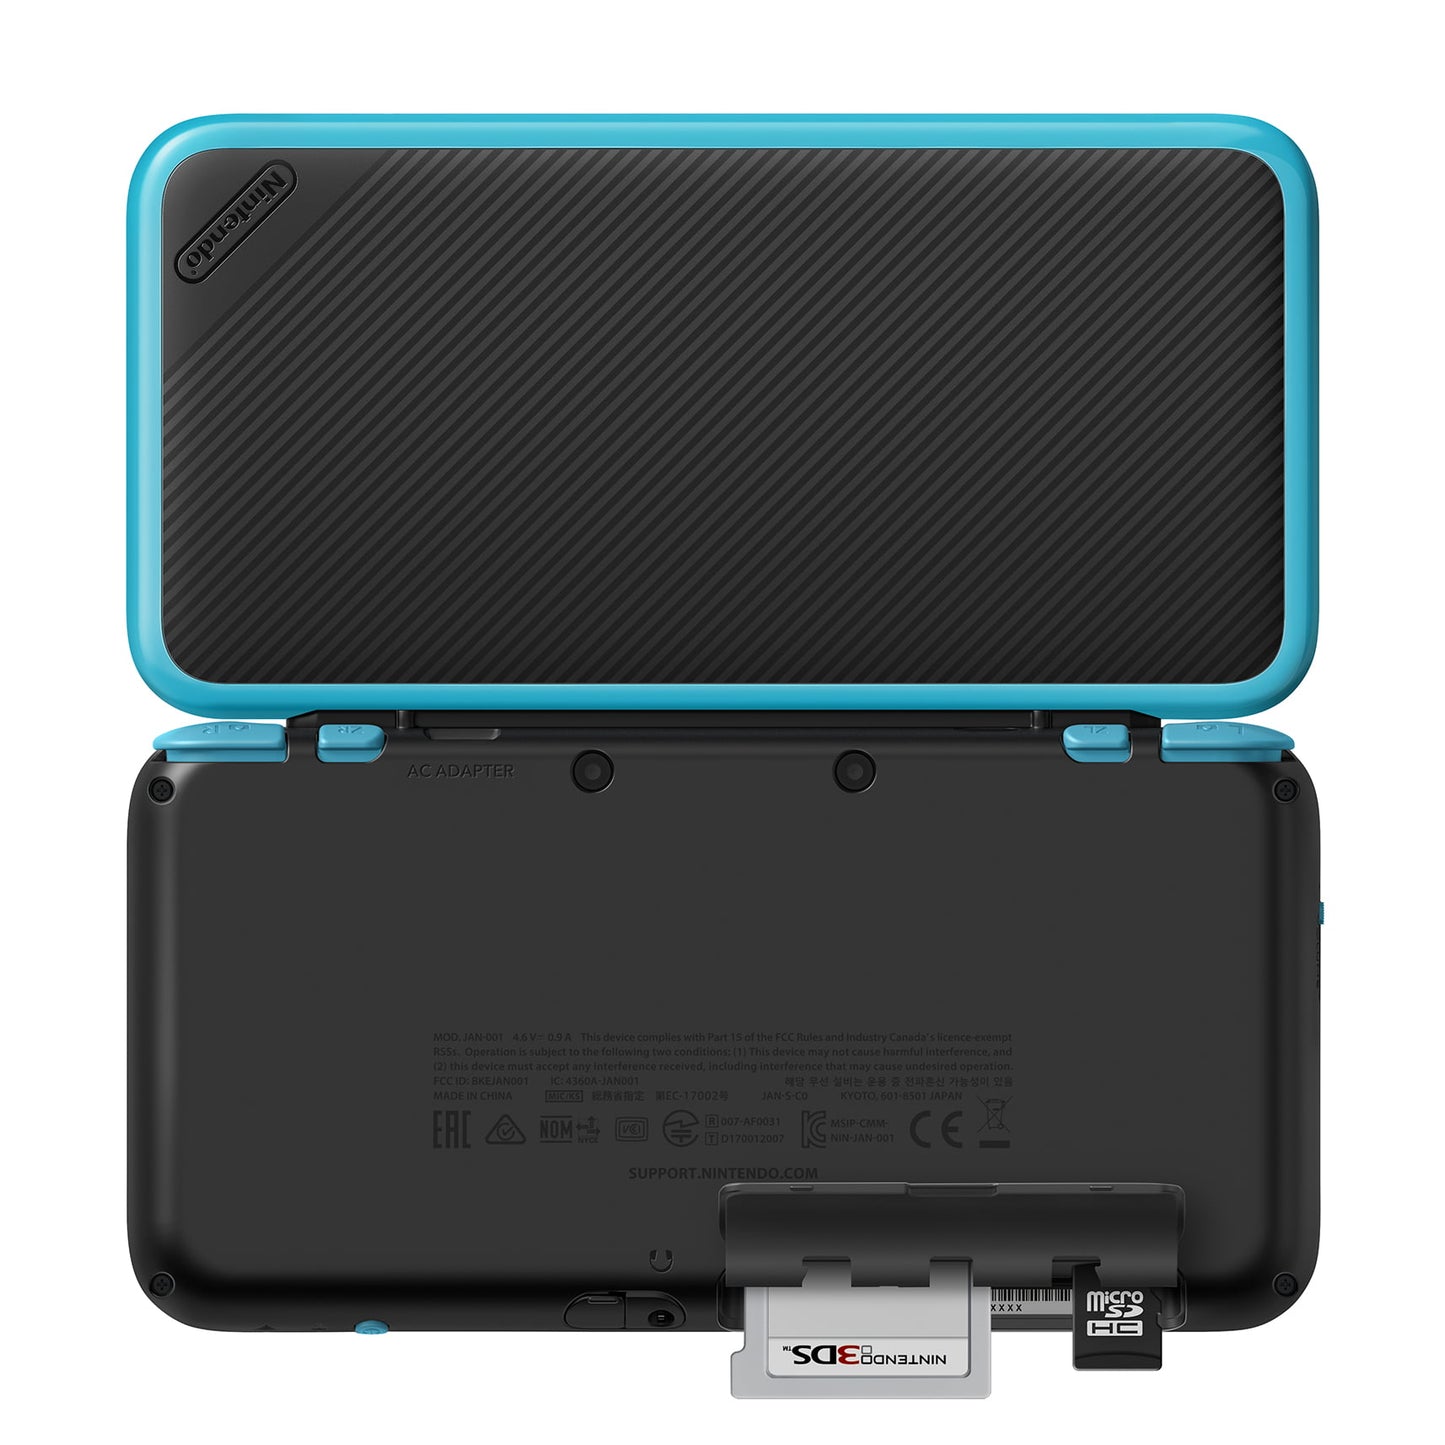 Nintendo 2DS XL Portable Gaming Console, Black & Turquoise